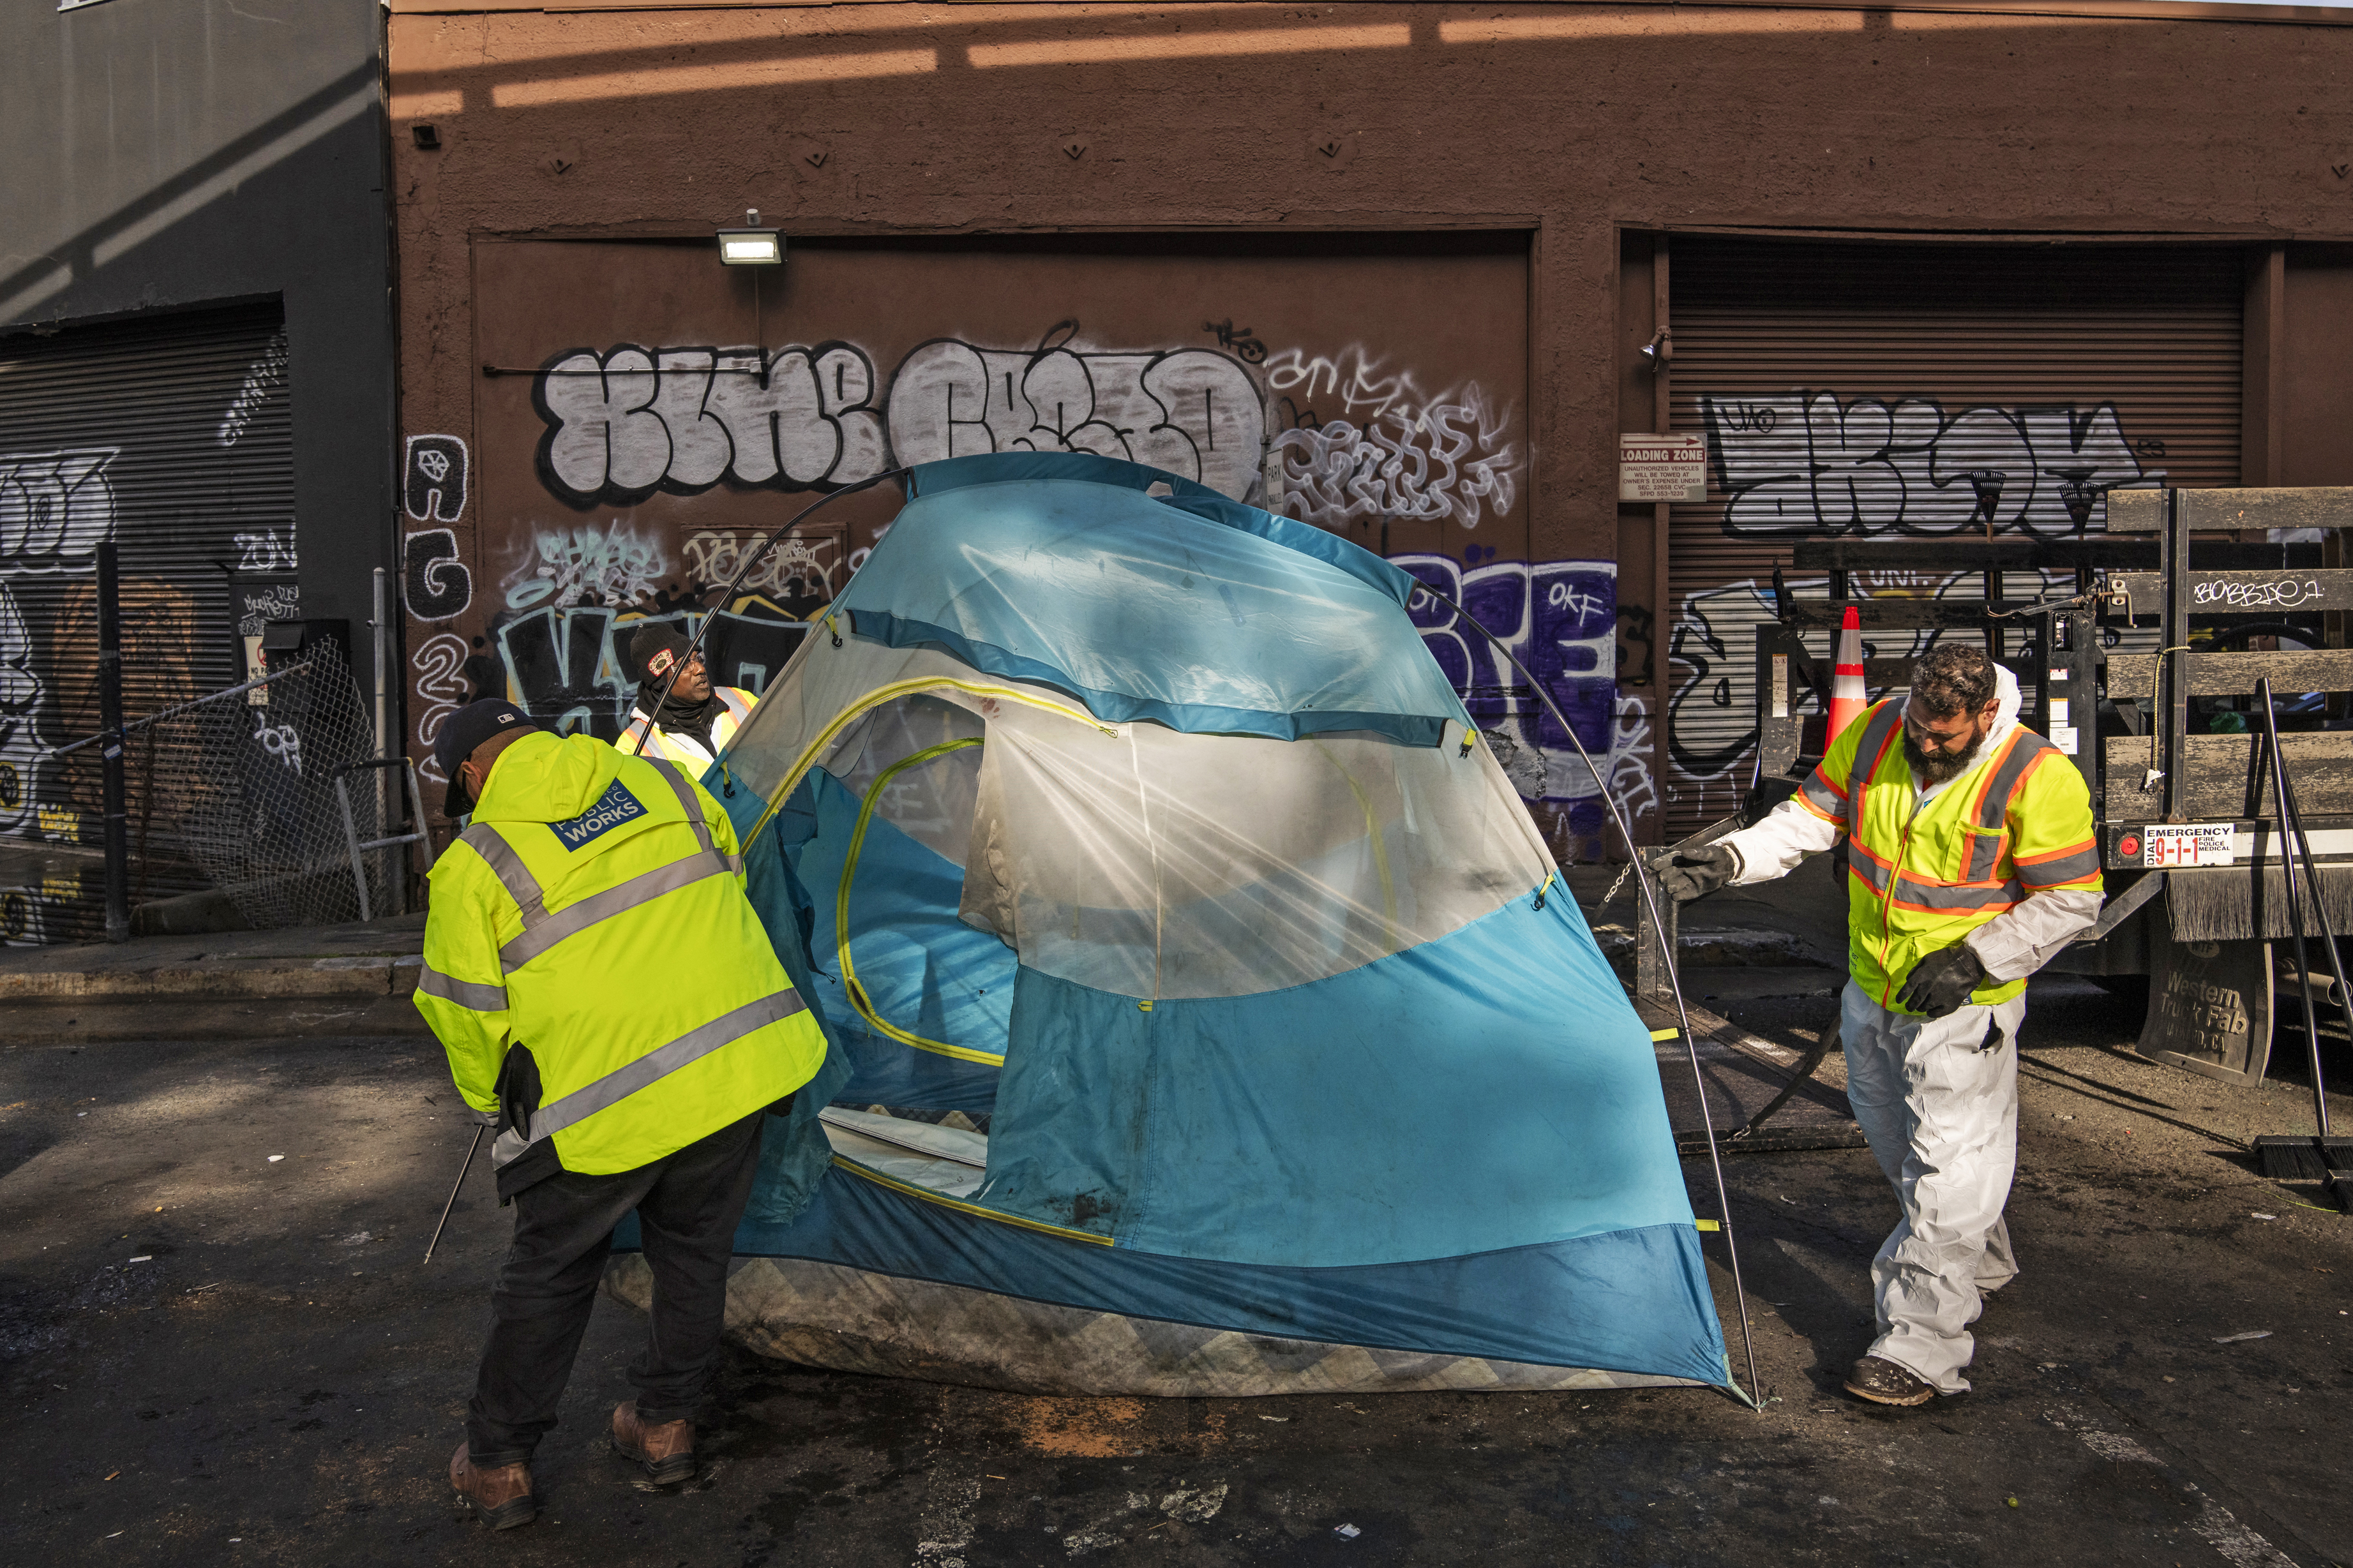 Workers in high-visibility vests handle a blue tent on an urban street with graffiti-covered walls.